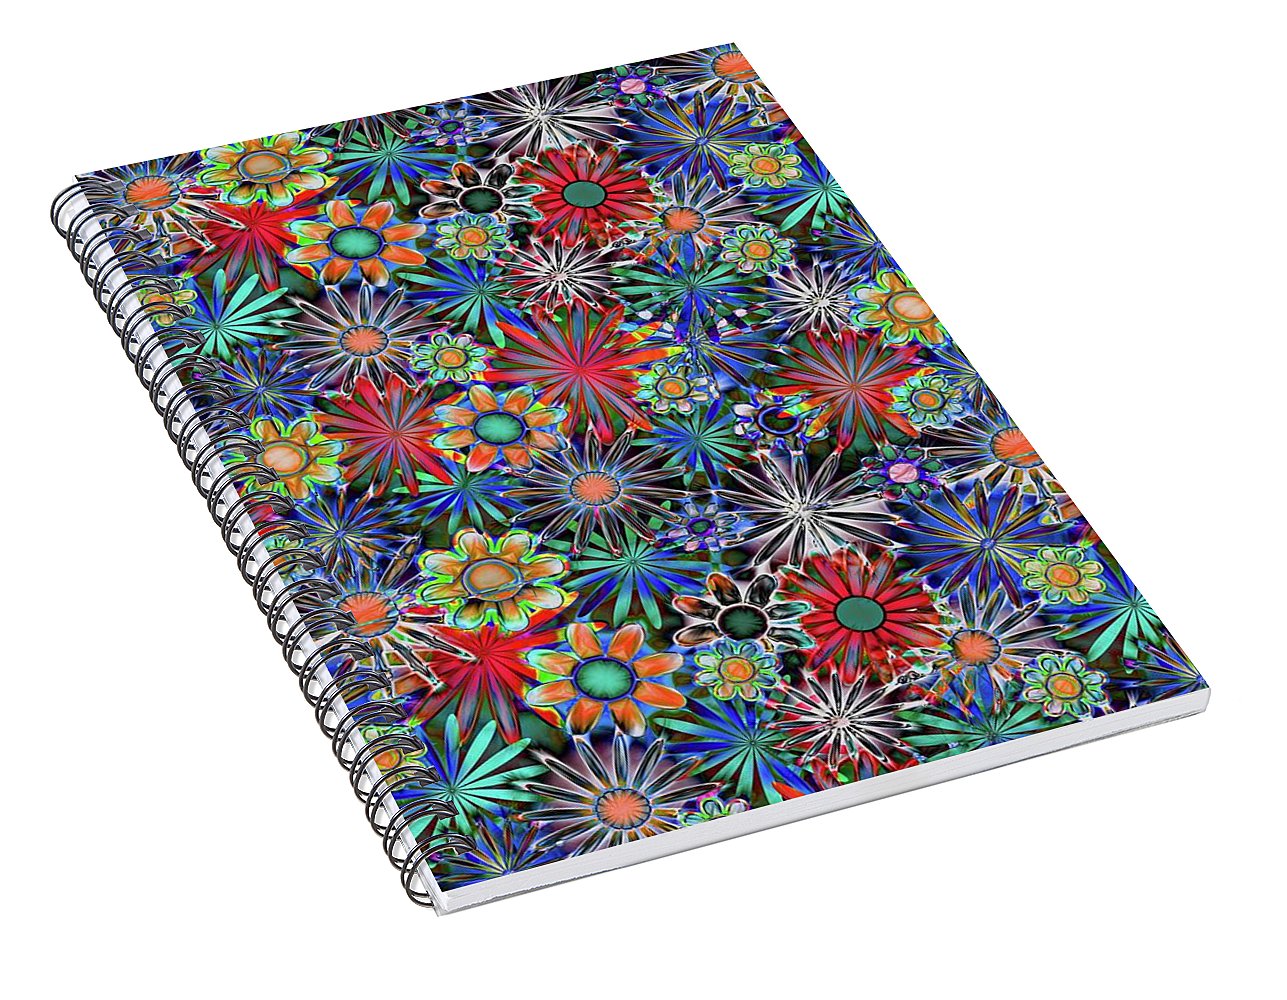 Tropical Daisies - Spiral Notebook